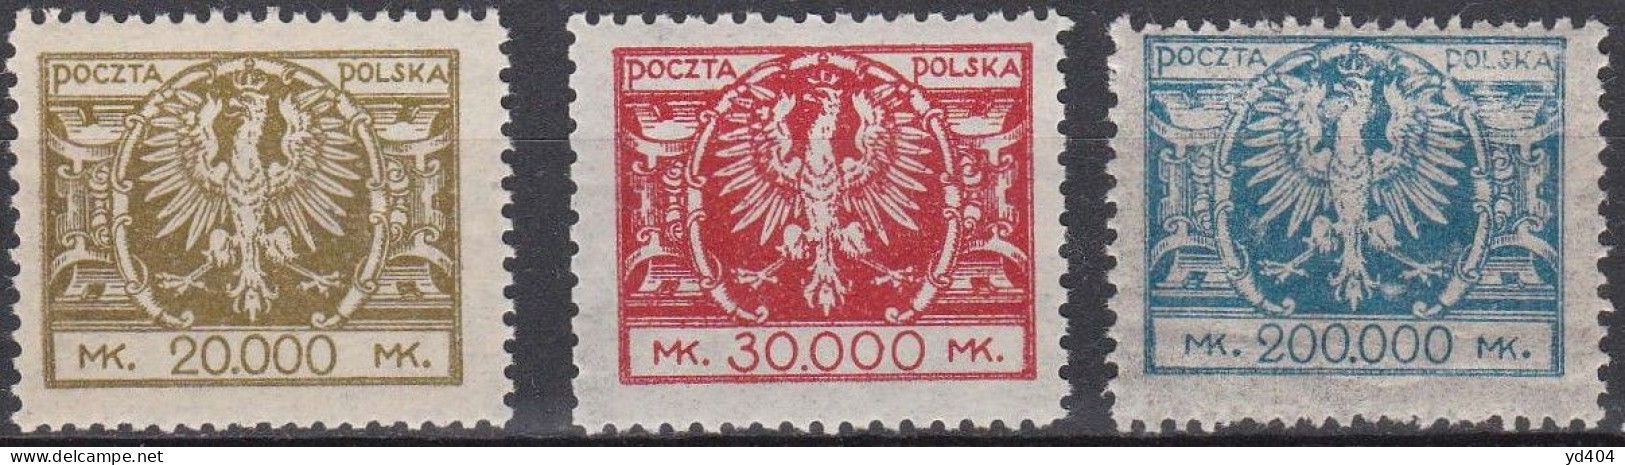 PL202 – POLOGNE - POLAND – 1924 – ARMS OF POLAND – MI # 192/3-196 MNH 11 € - Unused Stamps